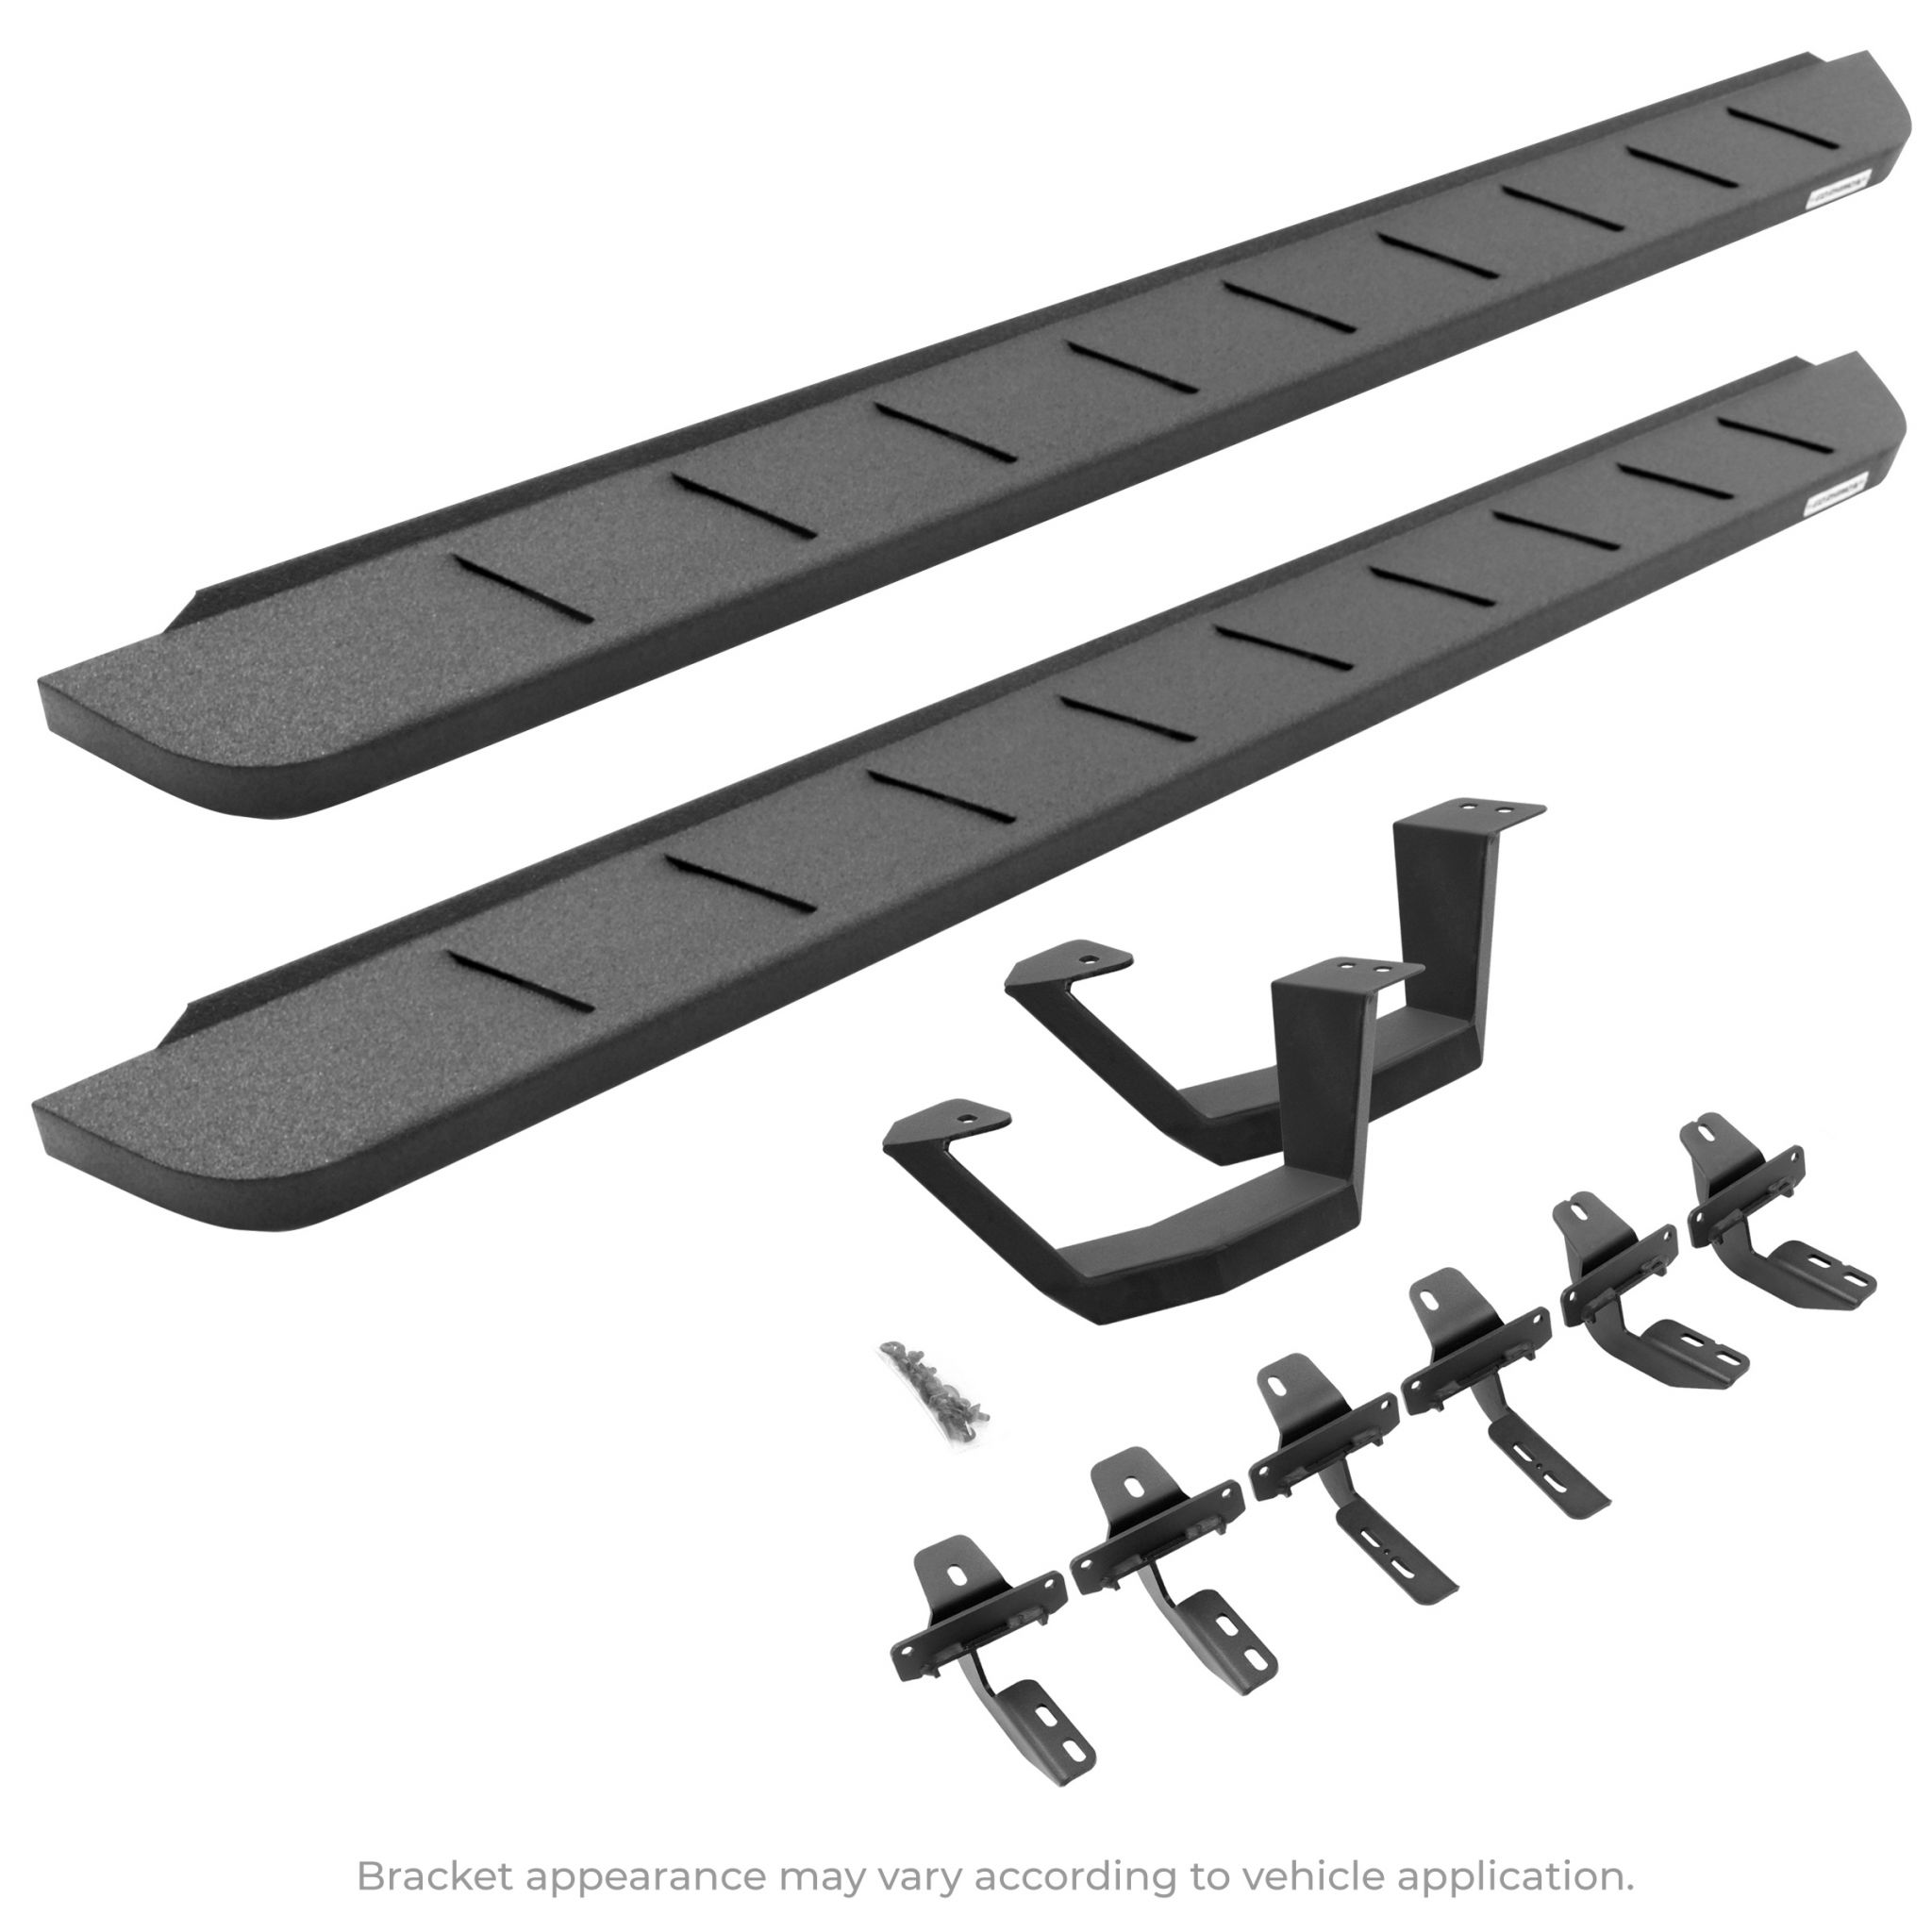 Go Rhino 63441734810T - RB10 Running Boards With Mounting Brackets & 1 Pair of Drop Steps Kit - Protective Bedliner Coating